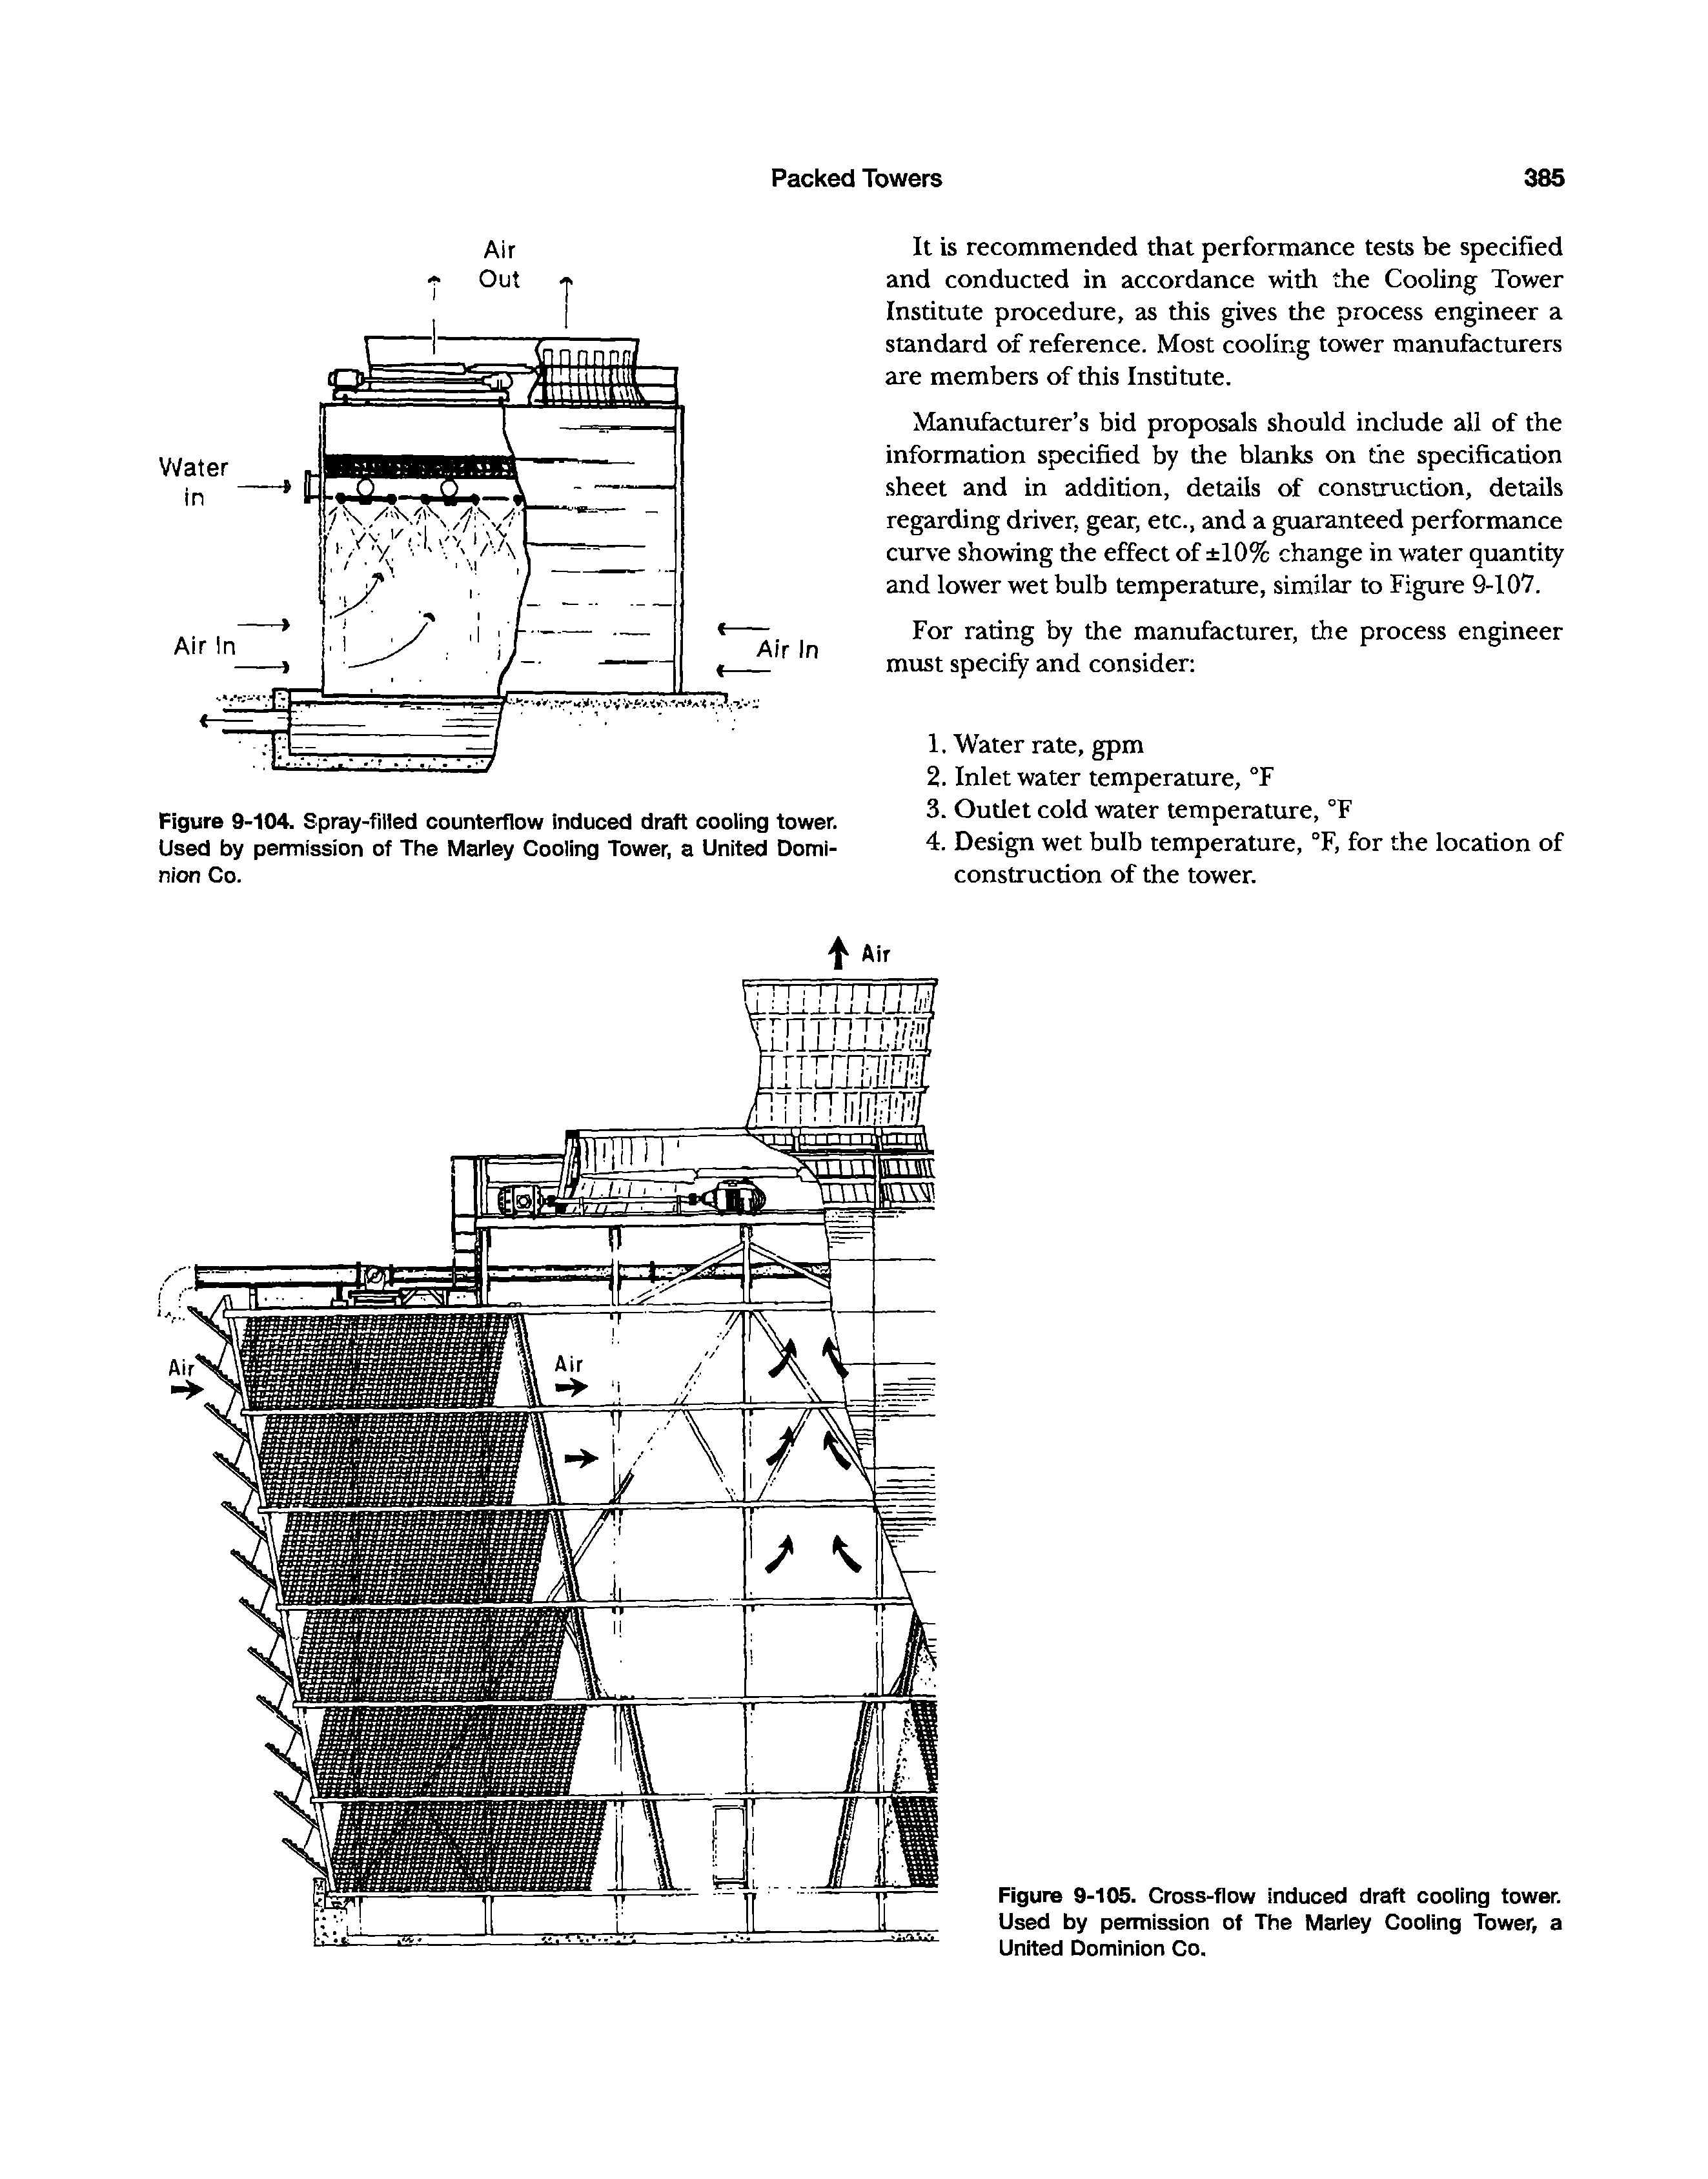 Figure 9-105. Cross-flow Induced draft cooling tower. Used by permission of The Marley Cooling Tower, a United Dominion Co.